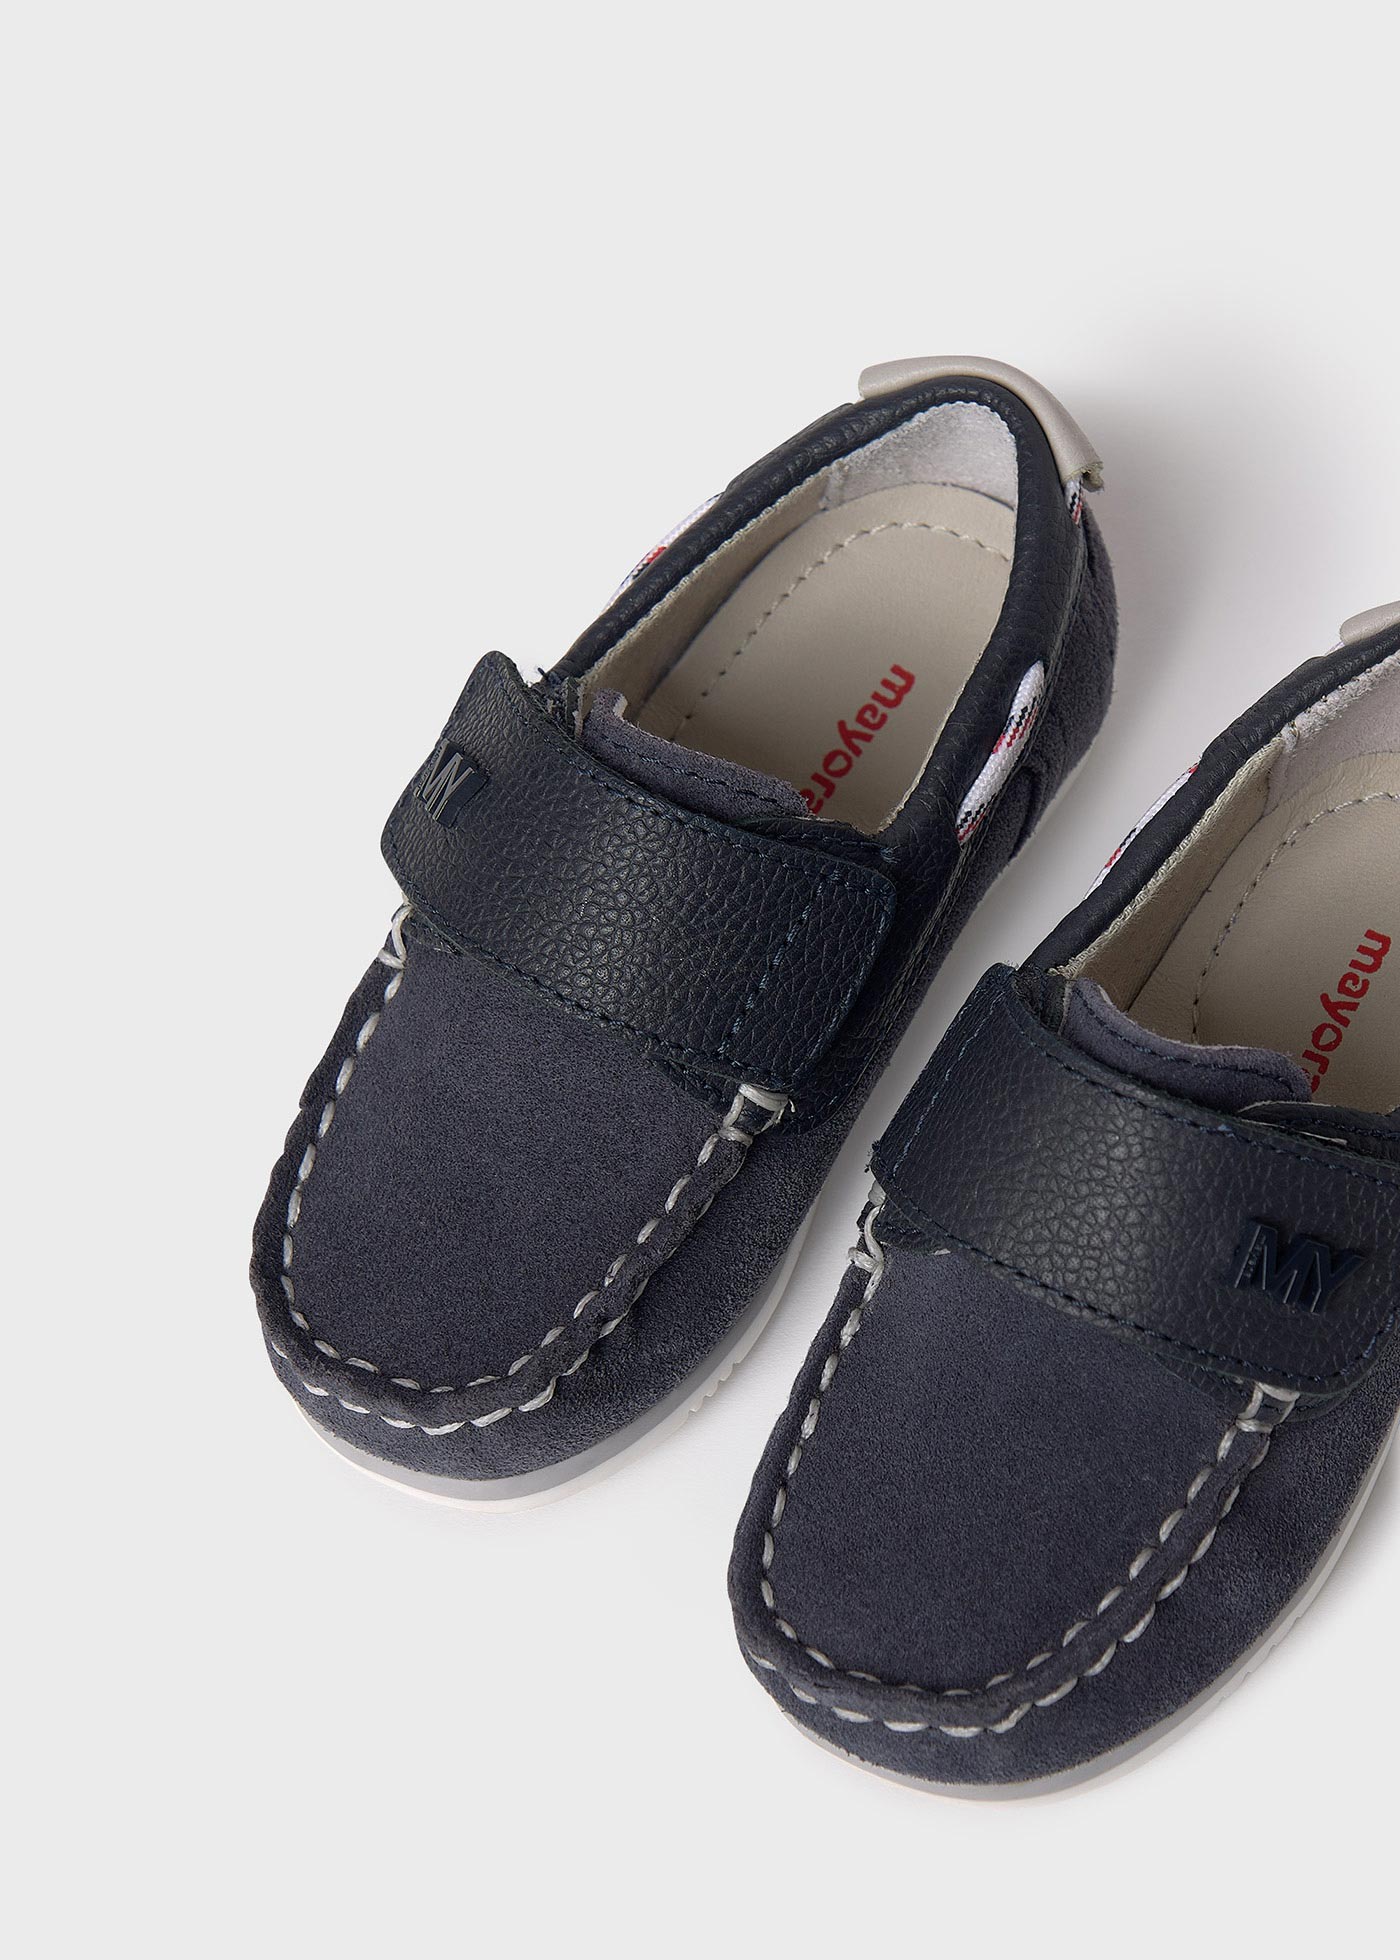 Baby boat shoes